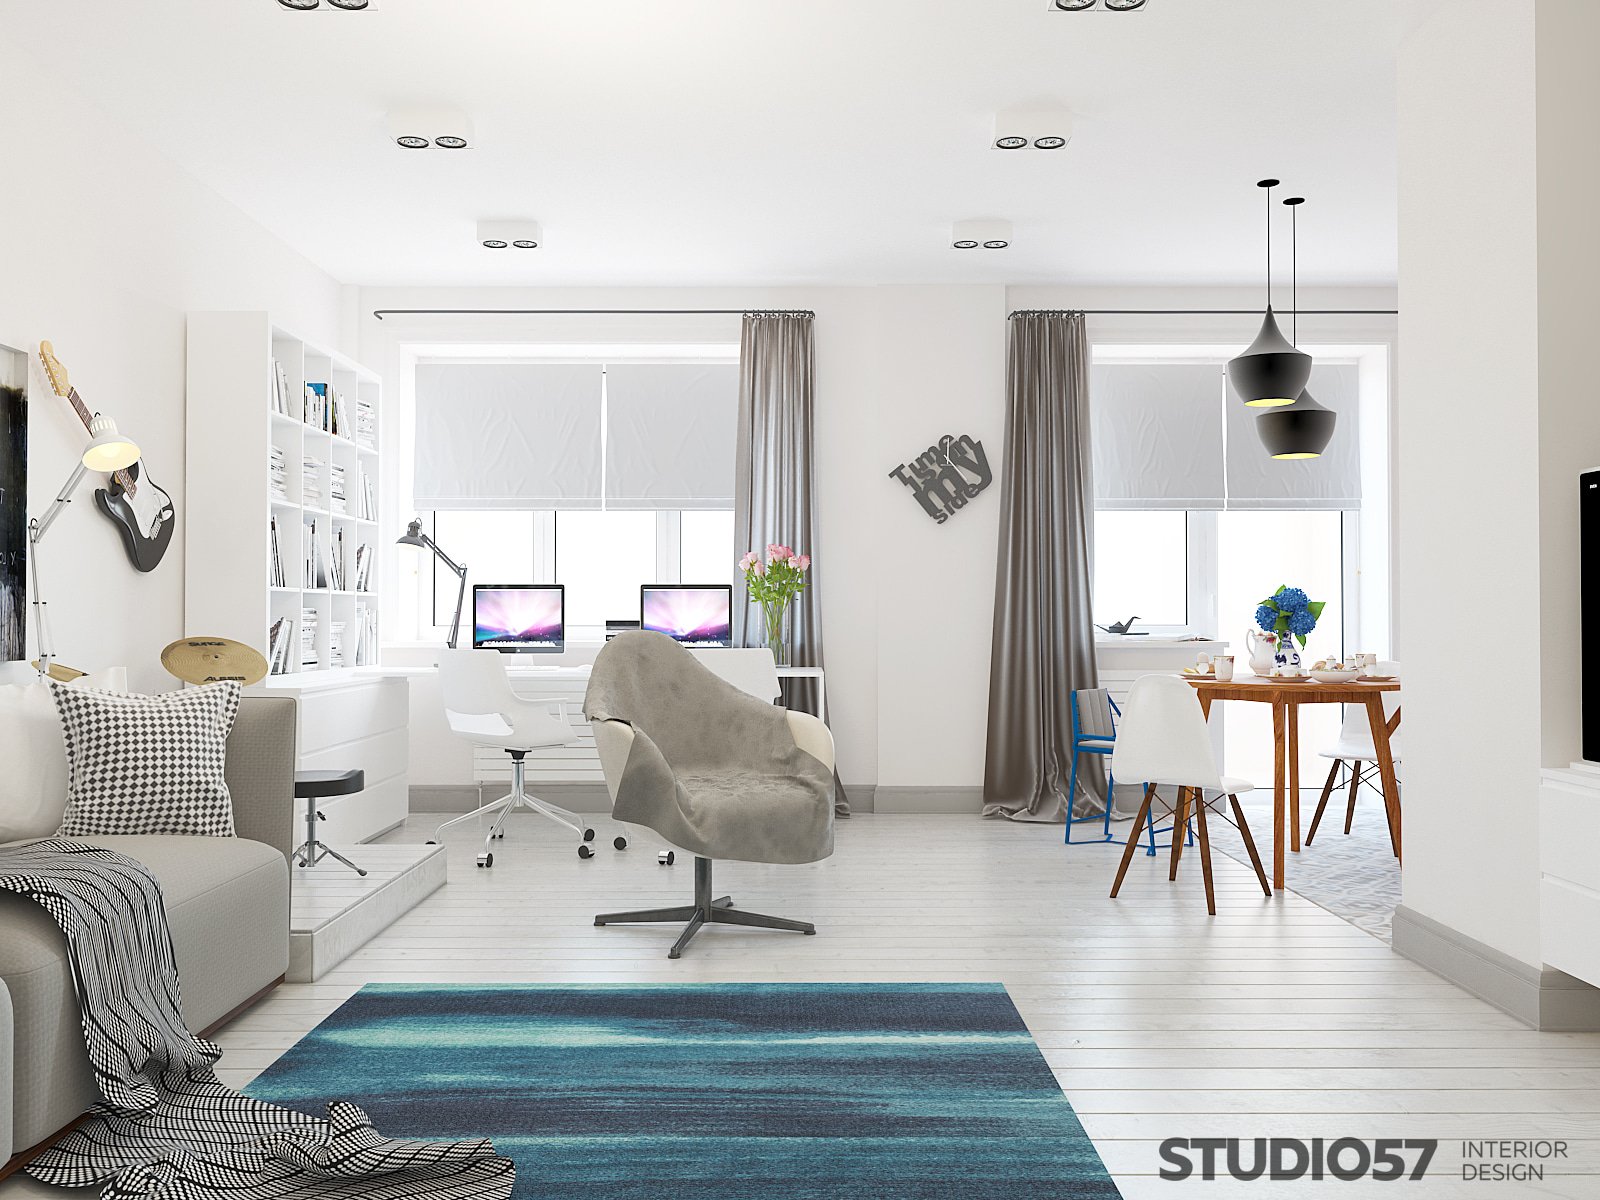 How to make a room in a studio photo